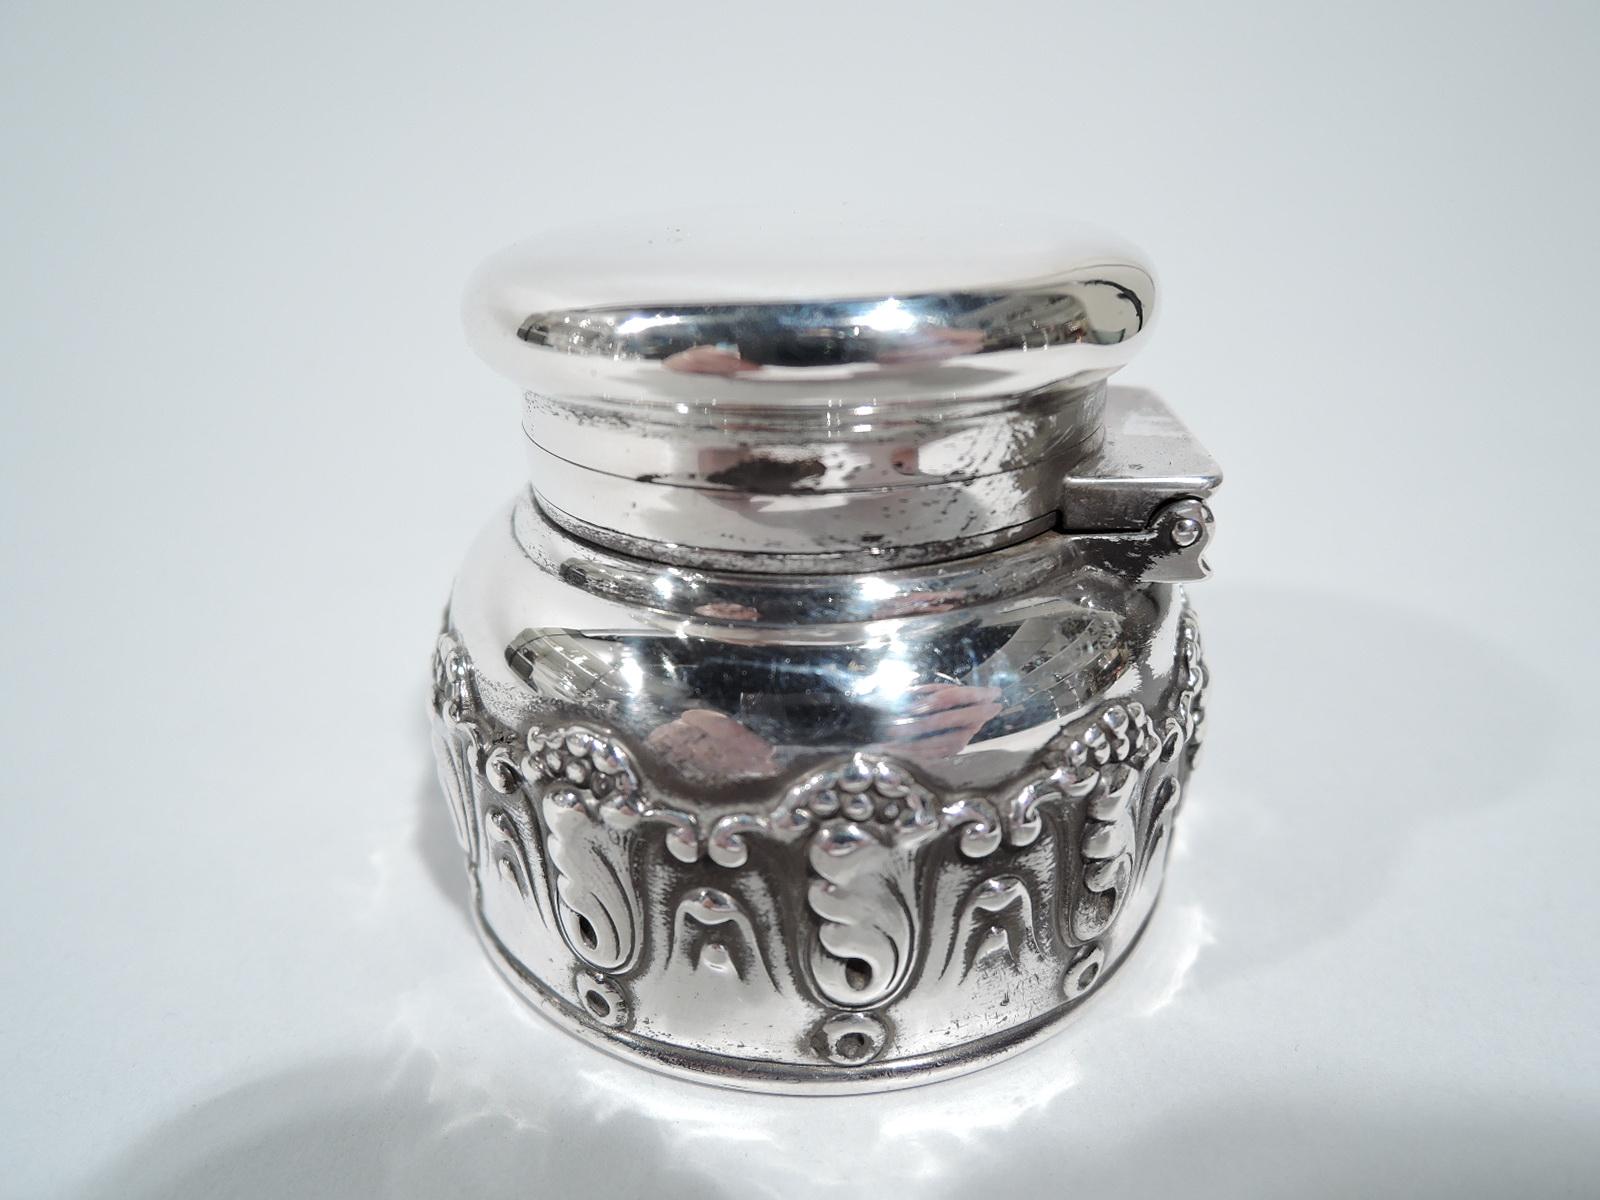 Art Nouveau sterling silver traveling inkwell. Made by Tiffany & Co. in New York. Round bowl with applied scrolling leaf and berry border, and curved shoulder. Cover flat, hinged, and overhanging. Bowl interior glass lined with poignant evidence of